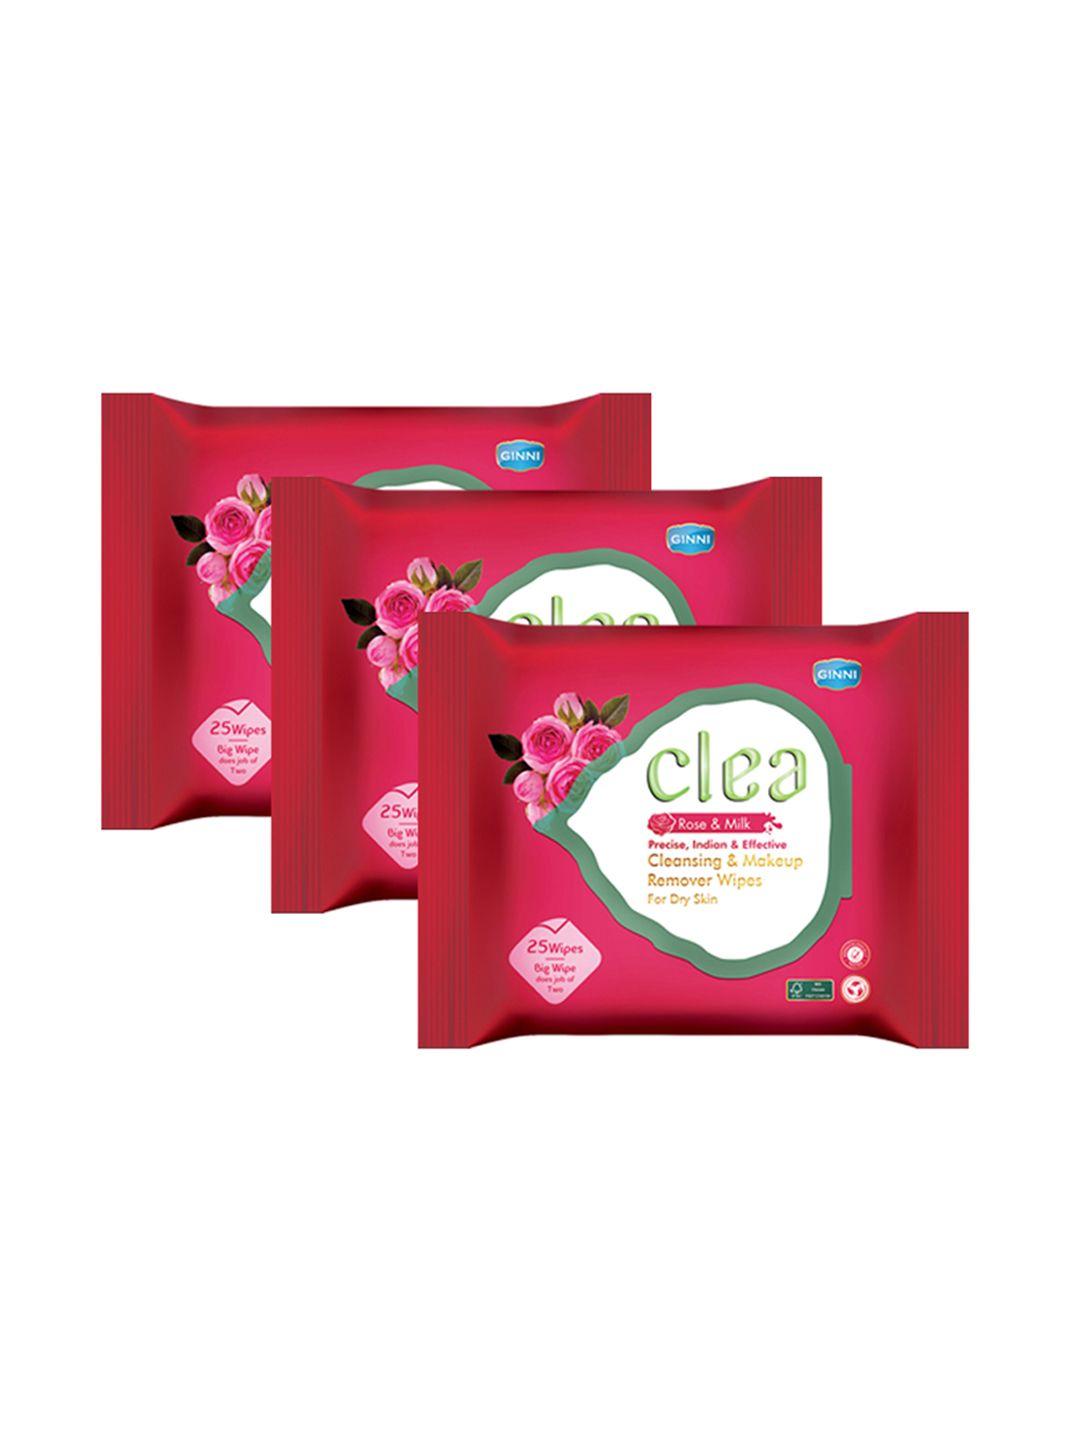 clea set of 3 rose & milk cleansing & makeup remover wet wipes - 25 pulls each